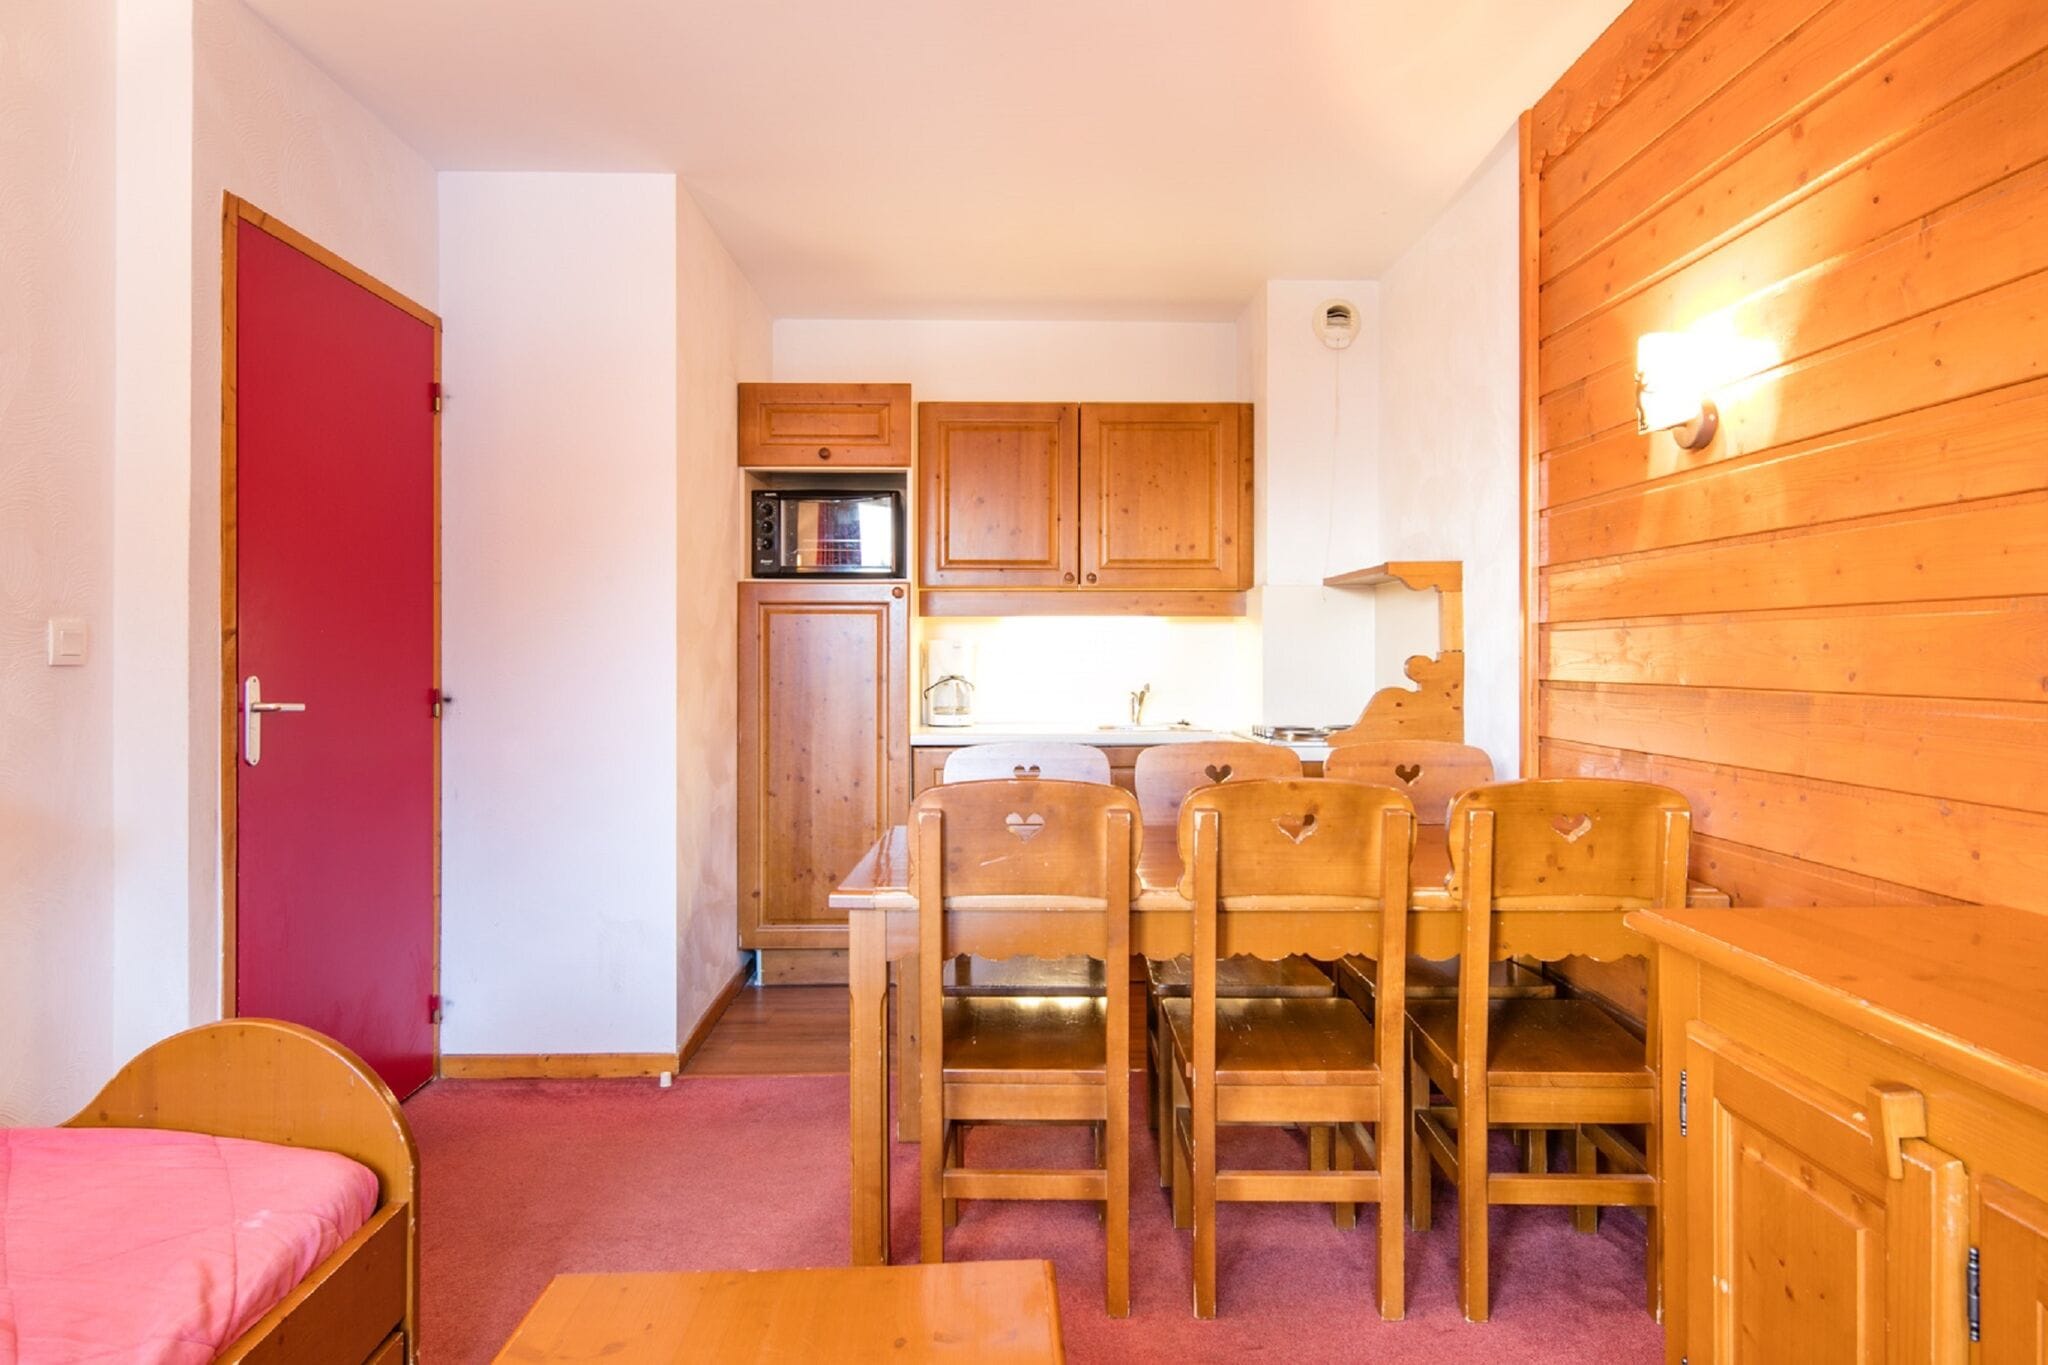 Comfortable apartment located at the ski slopes in Valfréjus